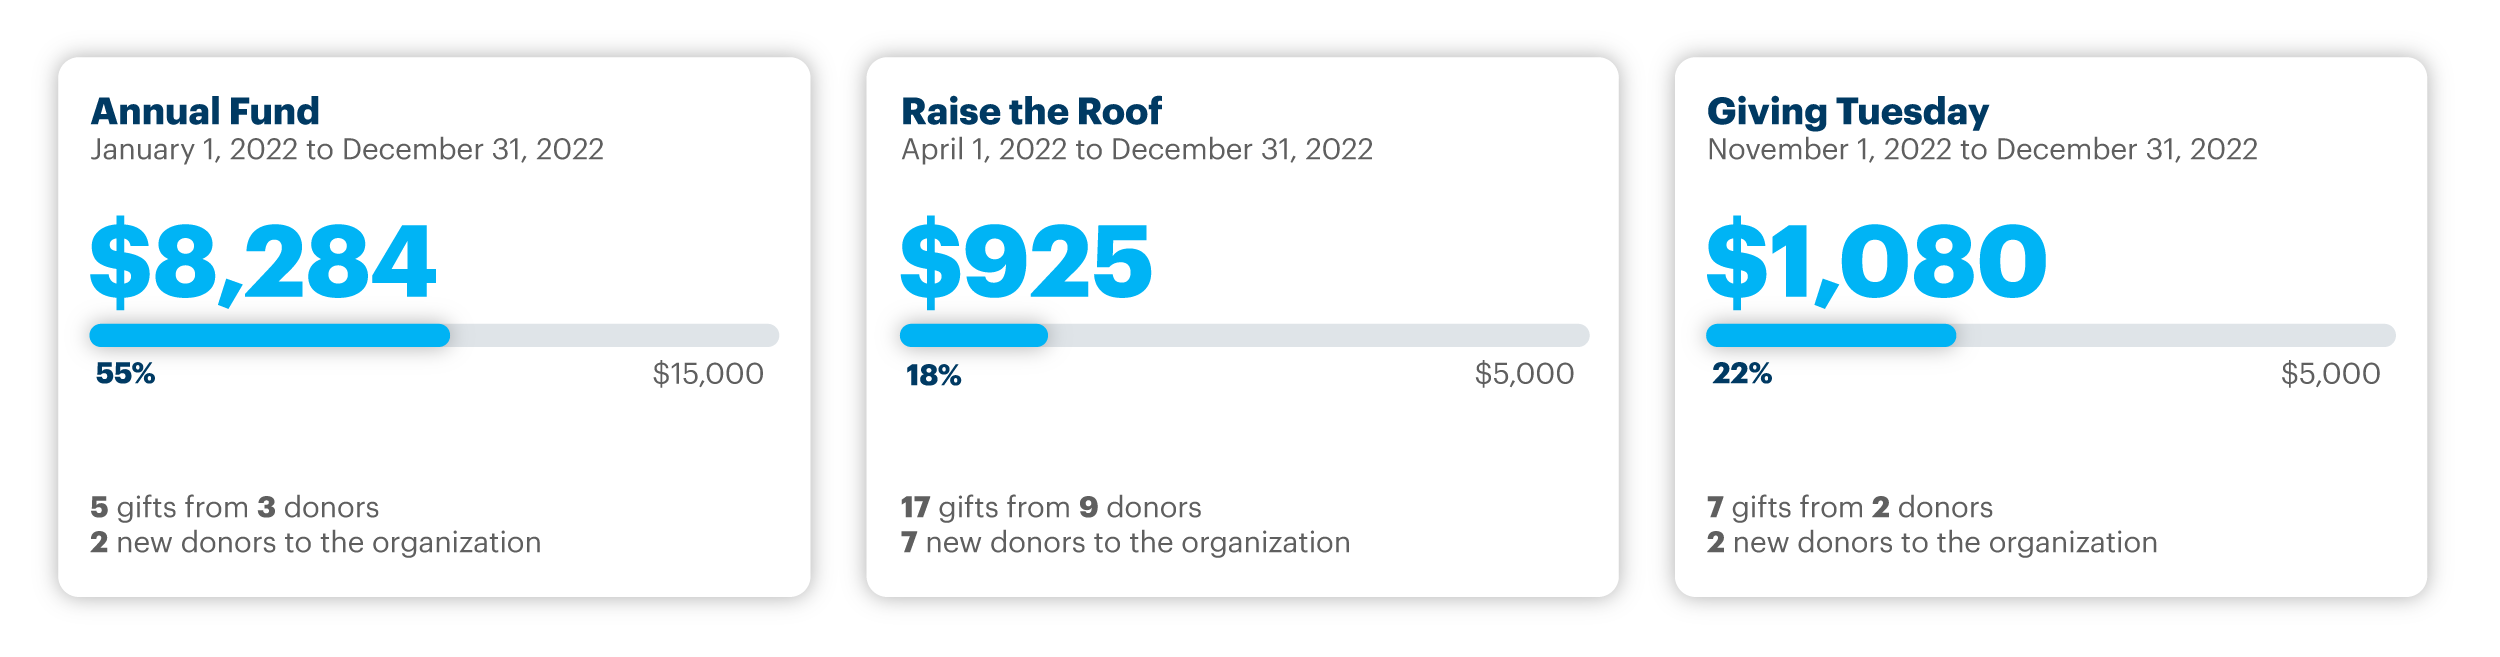 Example of goals dashboard in DonorPerfect with goals and progress bars for an Annual Fund, Raise the Roof and Giving Tuesday